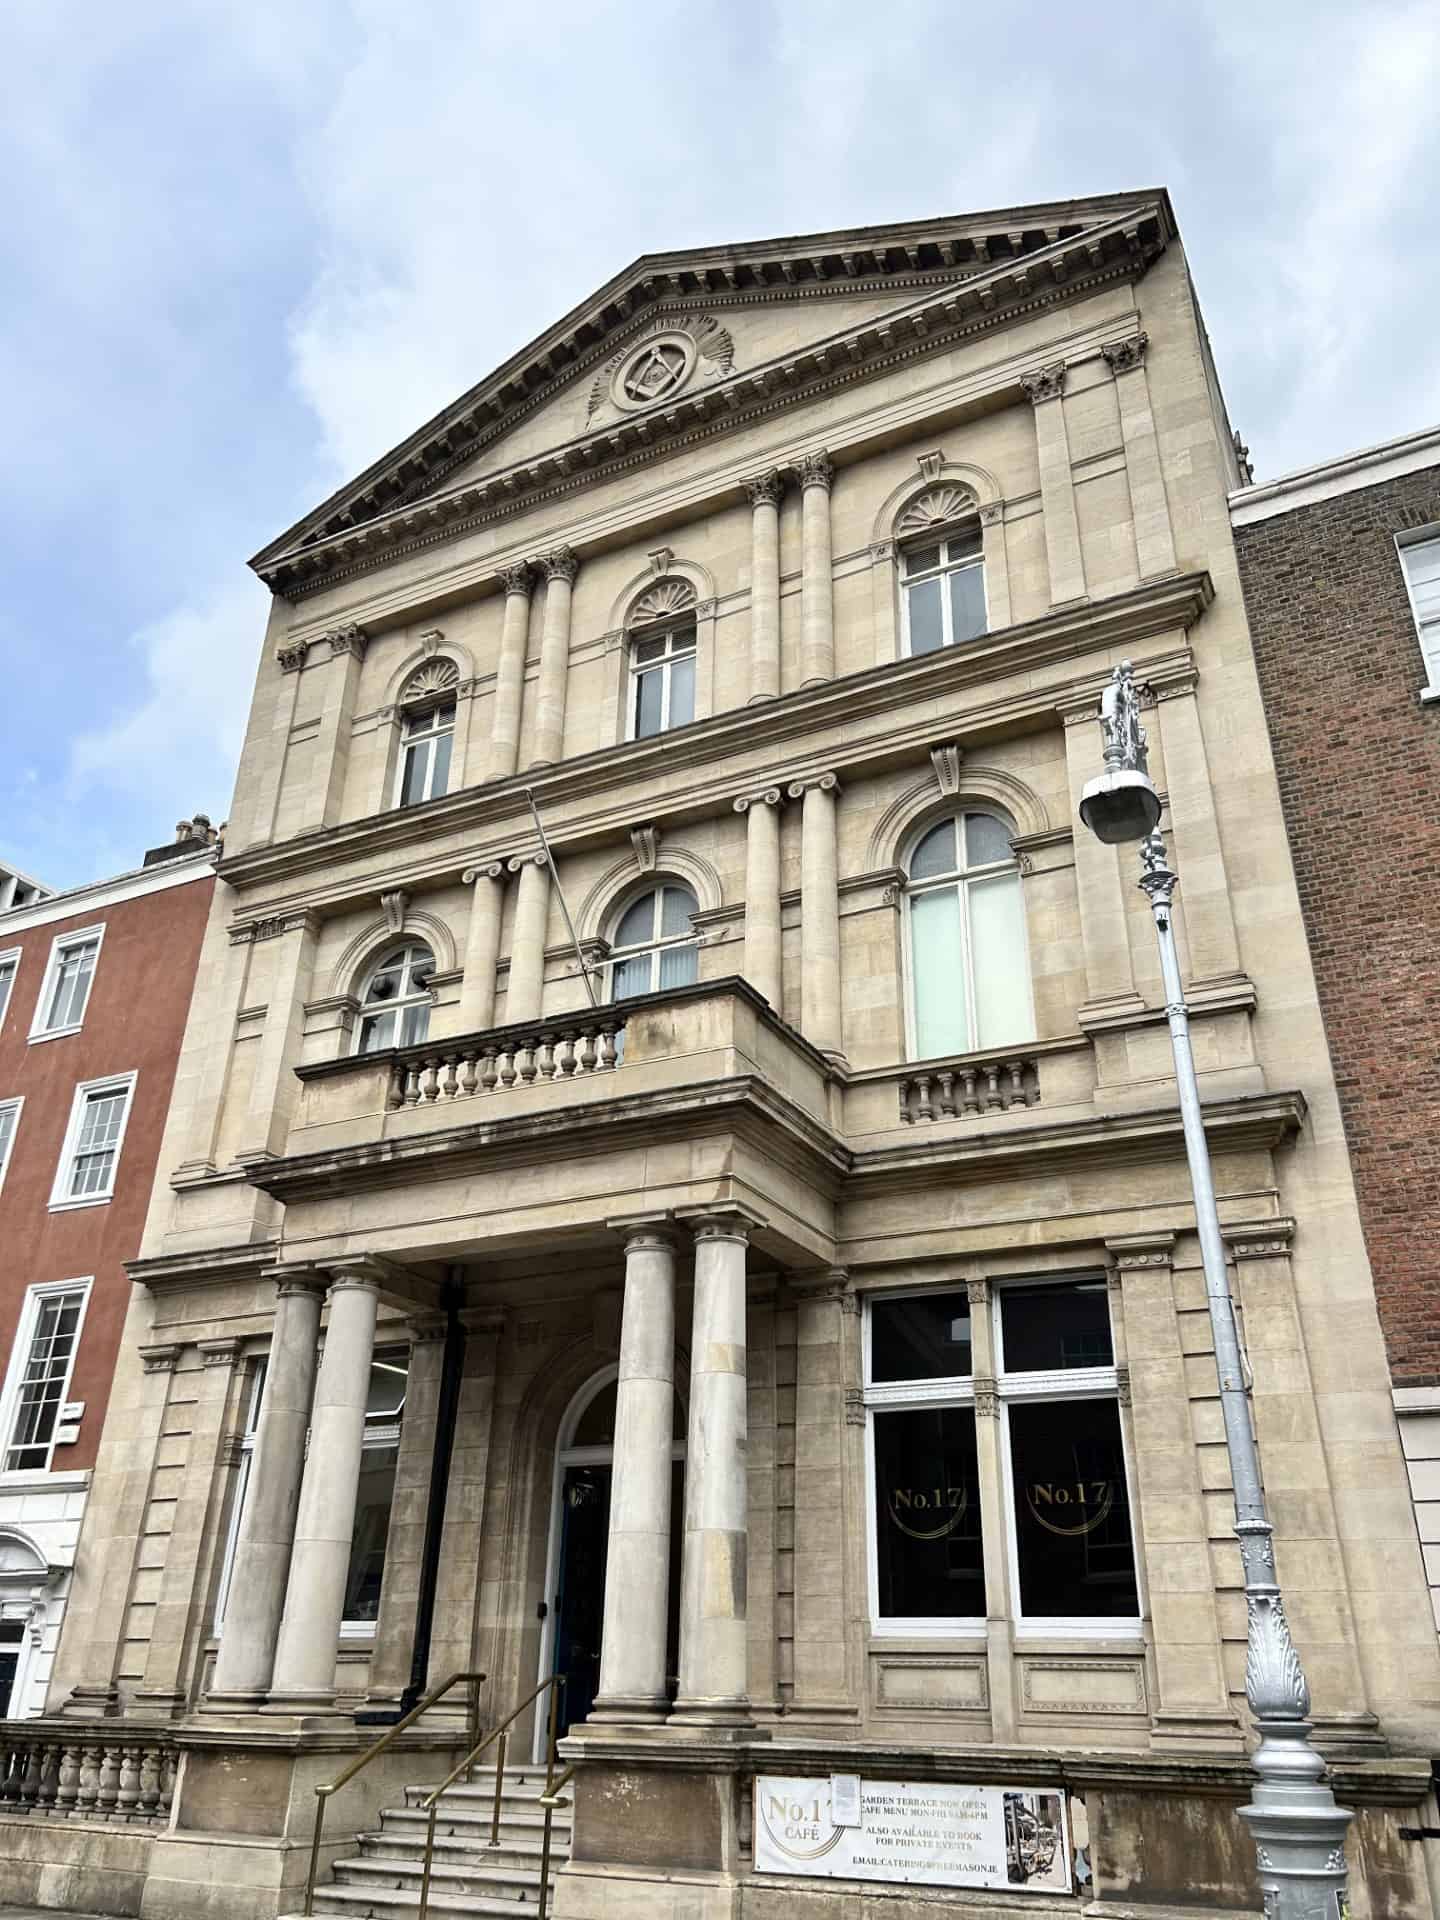 Dublin Freemasons Hall on Molesworth Street. Constructed in 1869. Designed by Edward Holmes of Birmingham, the building is designed in the Italian style demonstrating three of the orders of architecture from bottom floor to top: Doric, Ionic, and Corinthian. The building is constructed of English Ancaster Limestone. photo courtesy Shea McEnerney